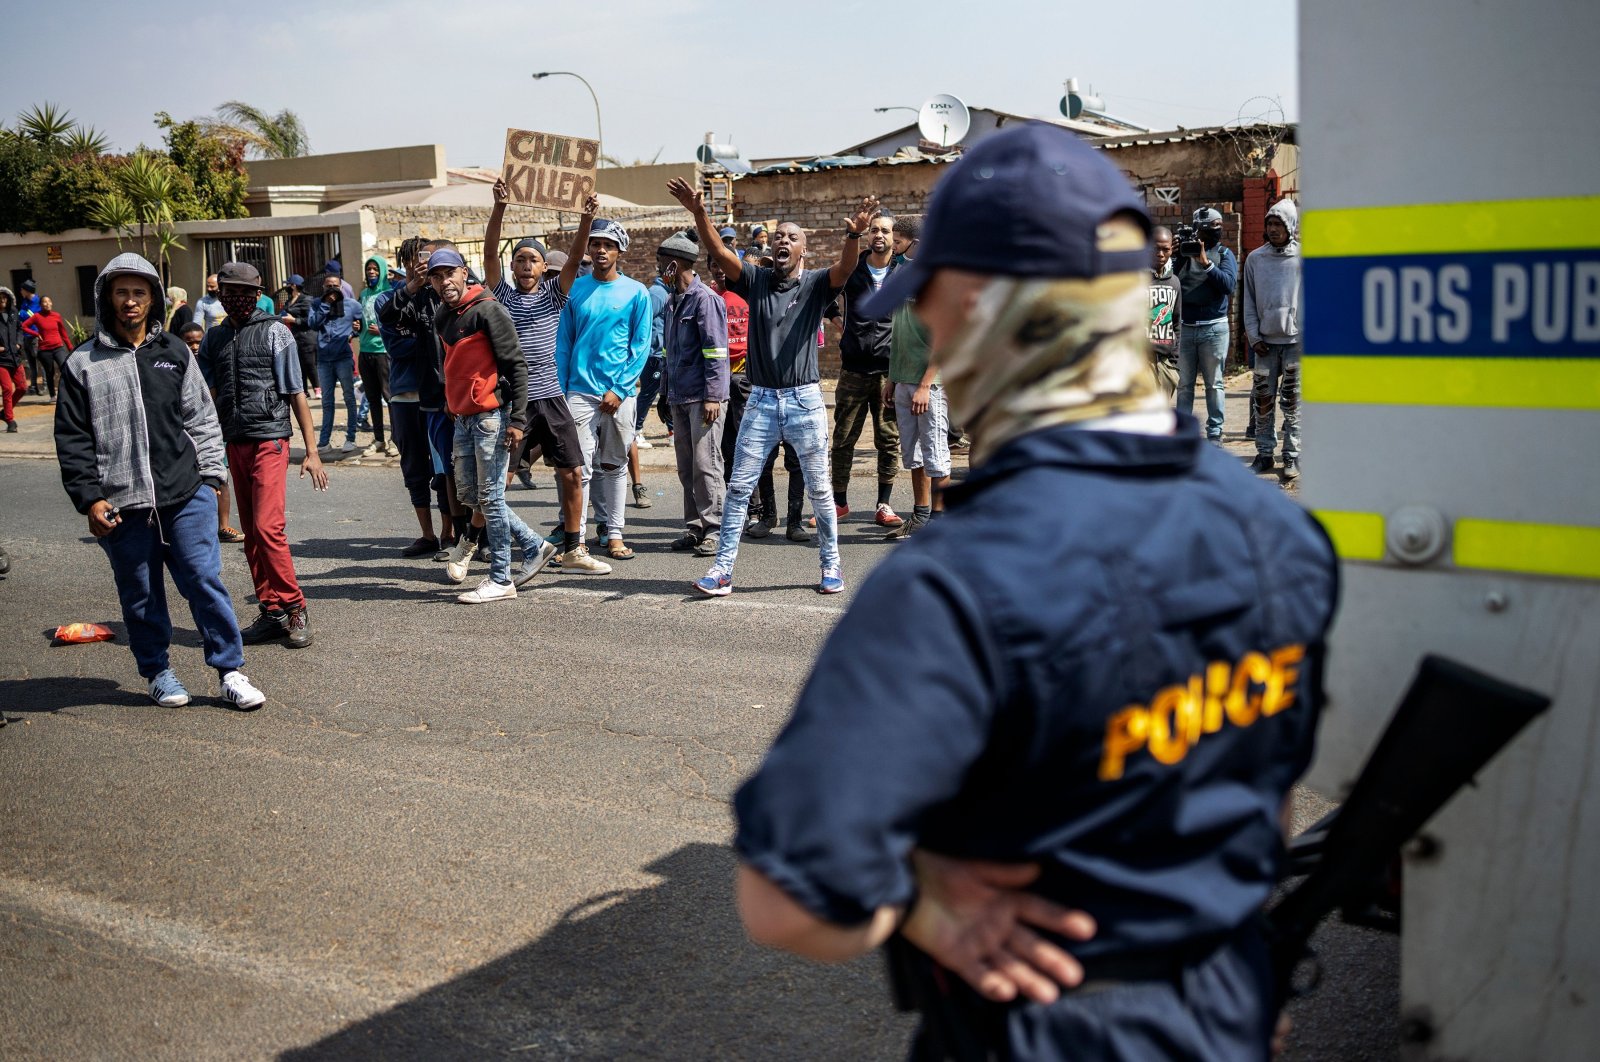 A member of the South African Police Service (SAPS) watch as residents protest outside the SAPS offices in Eldorado Park, Johannesburg, Aug. 27, 2020. (AFP Photo)